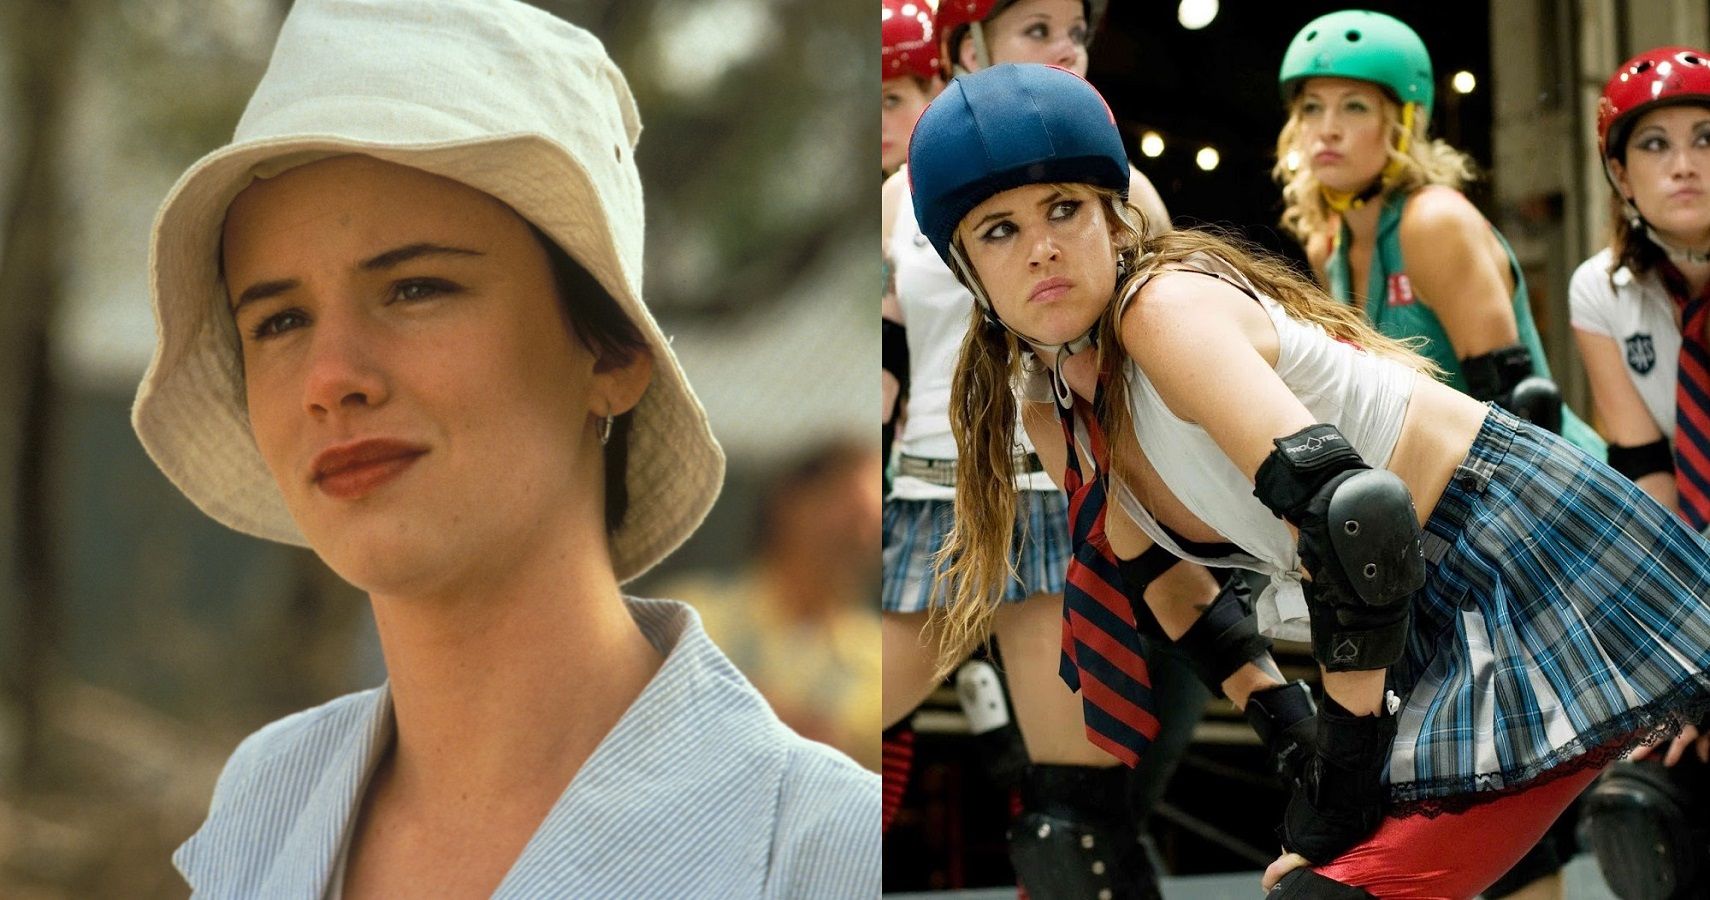 Juliette Lewis' 10 Best Movies, According to Rotten Tomatoes